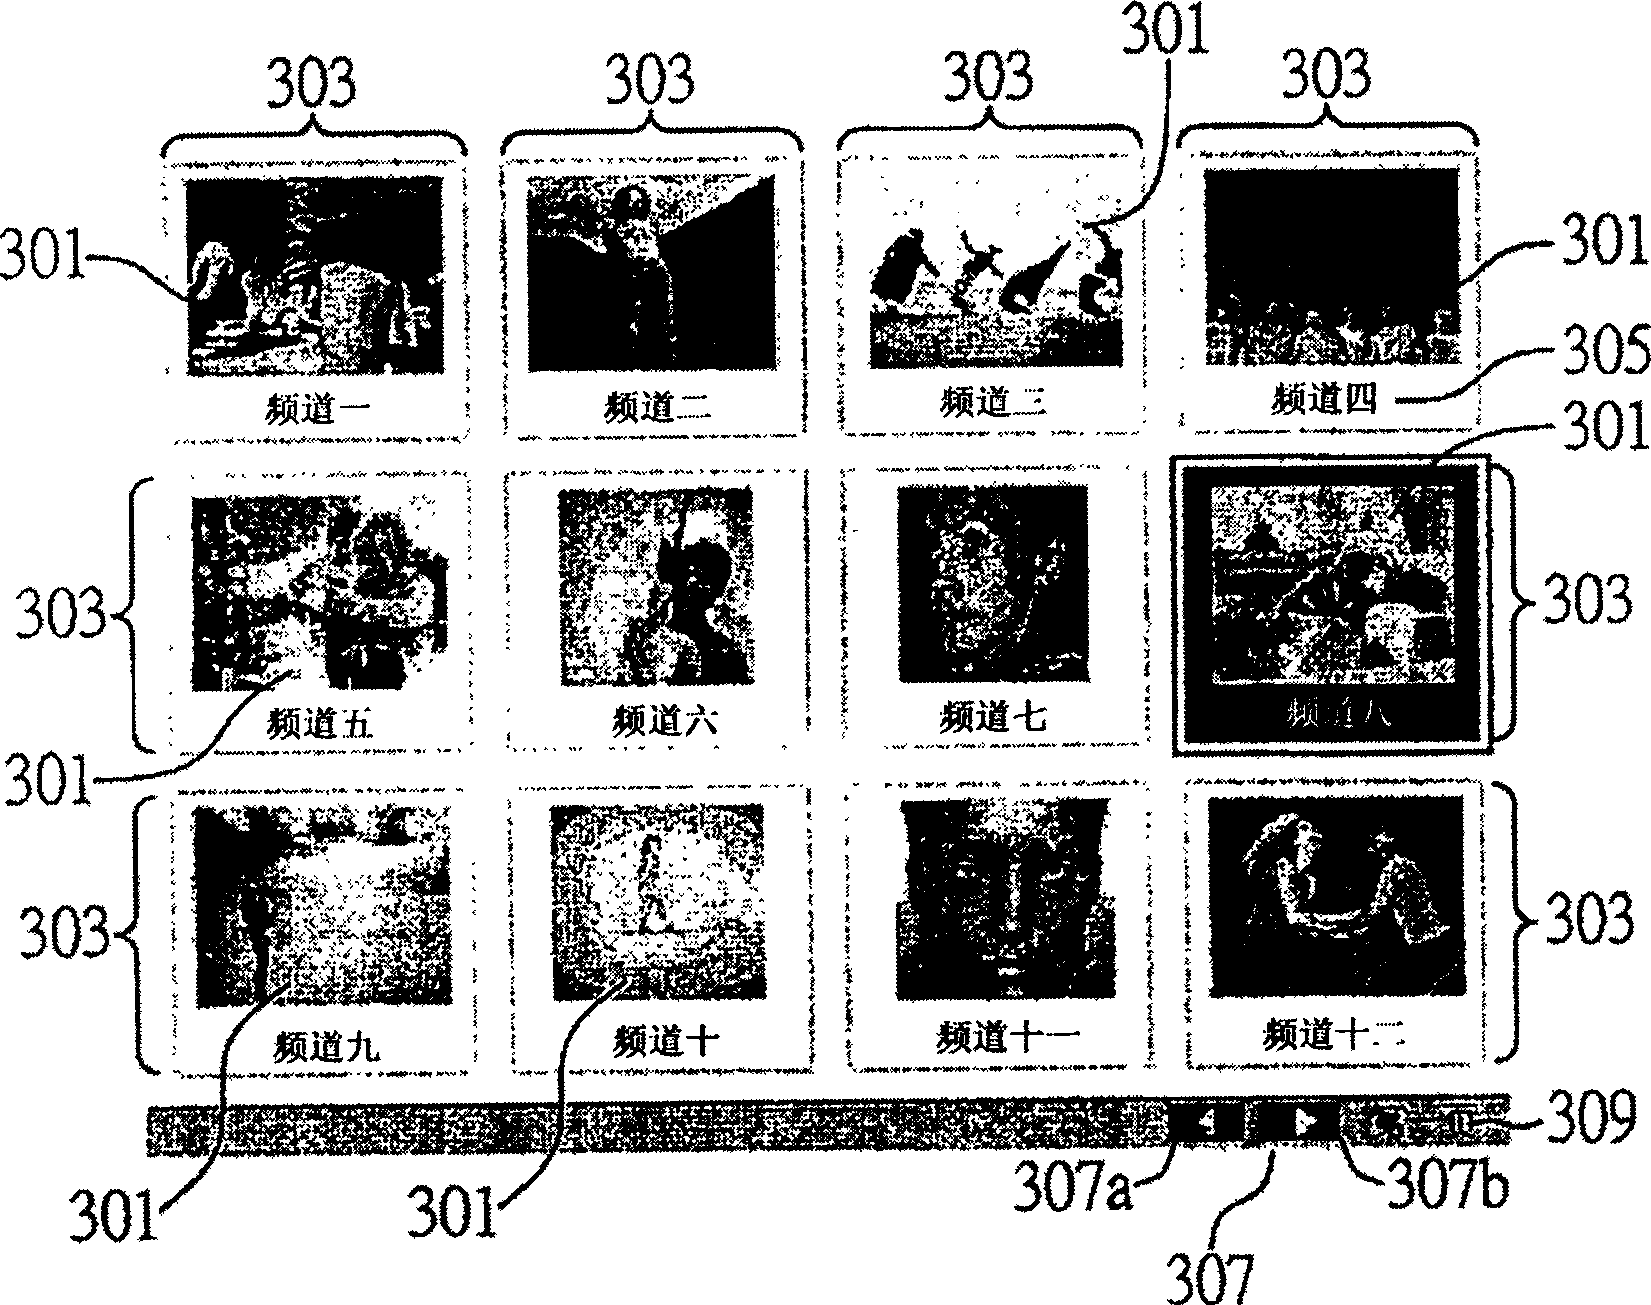 Video frequency browsing system and method